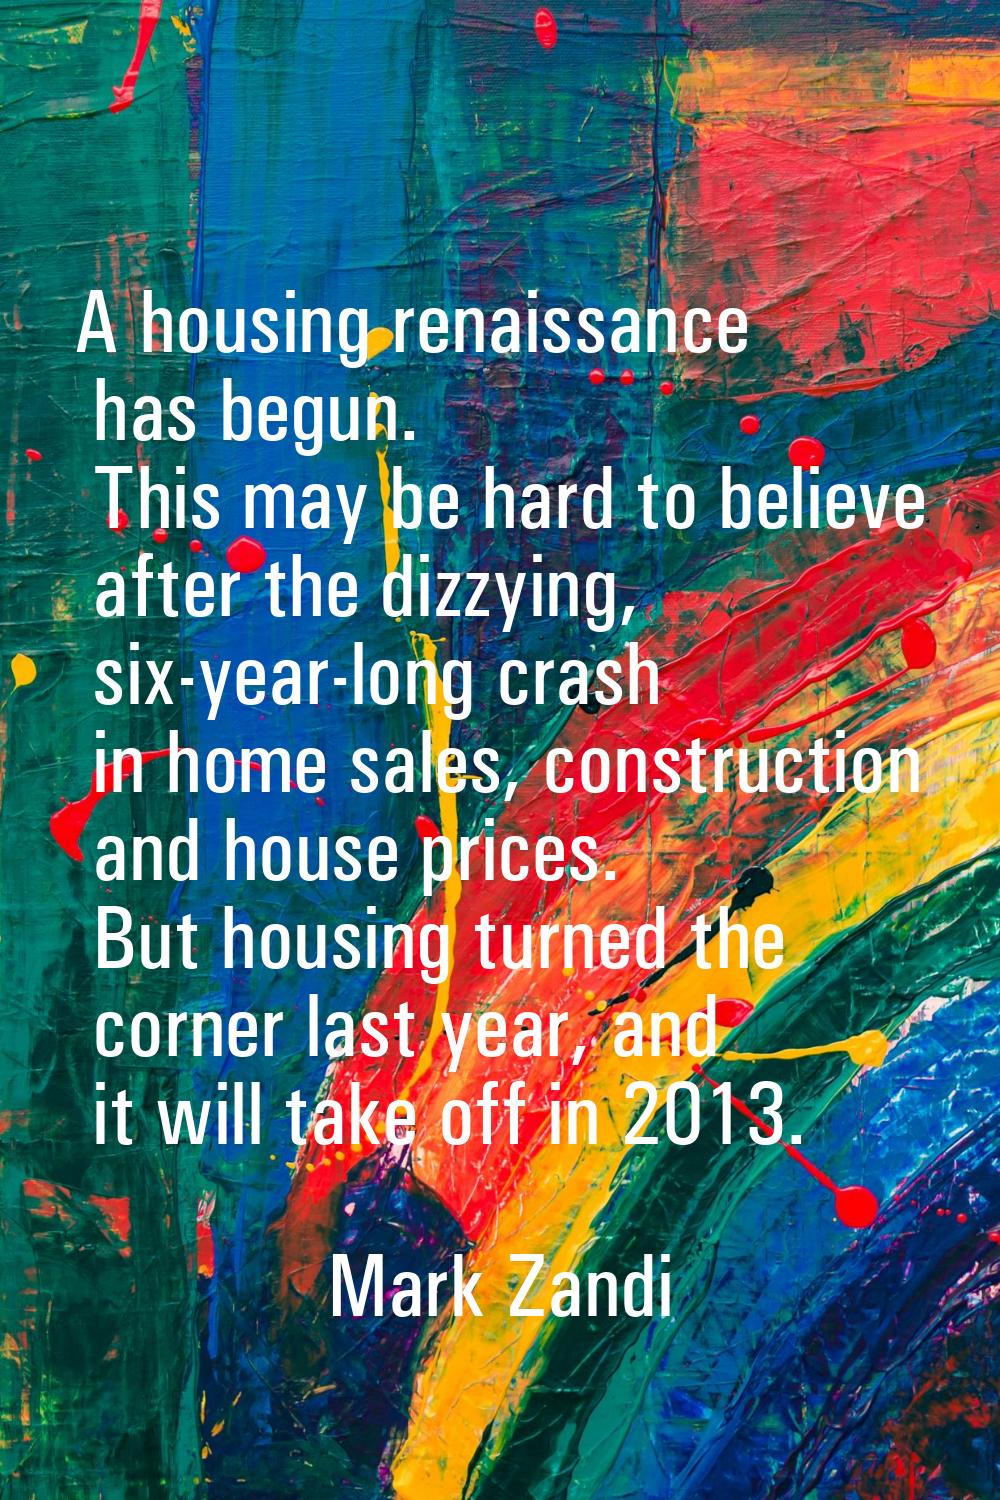 A housing renaissance has begun. This may be hard to believe after the dizzying, six-year-long cras